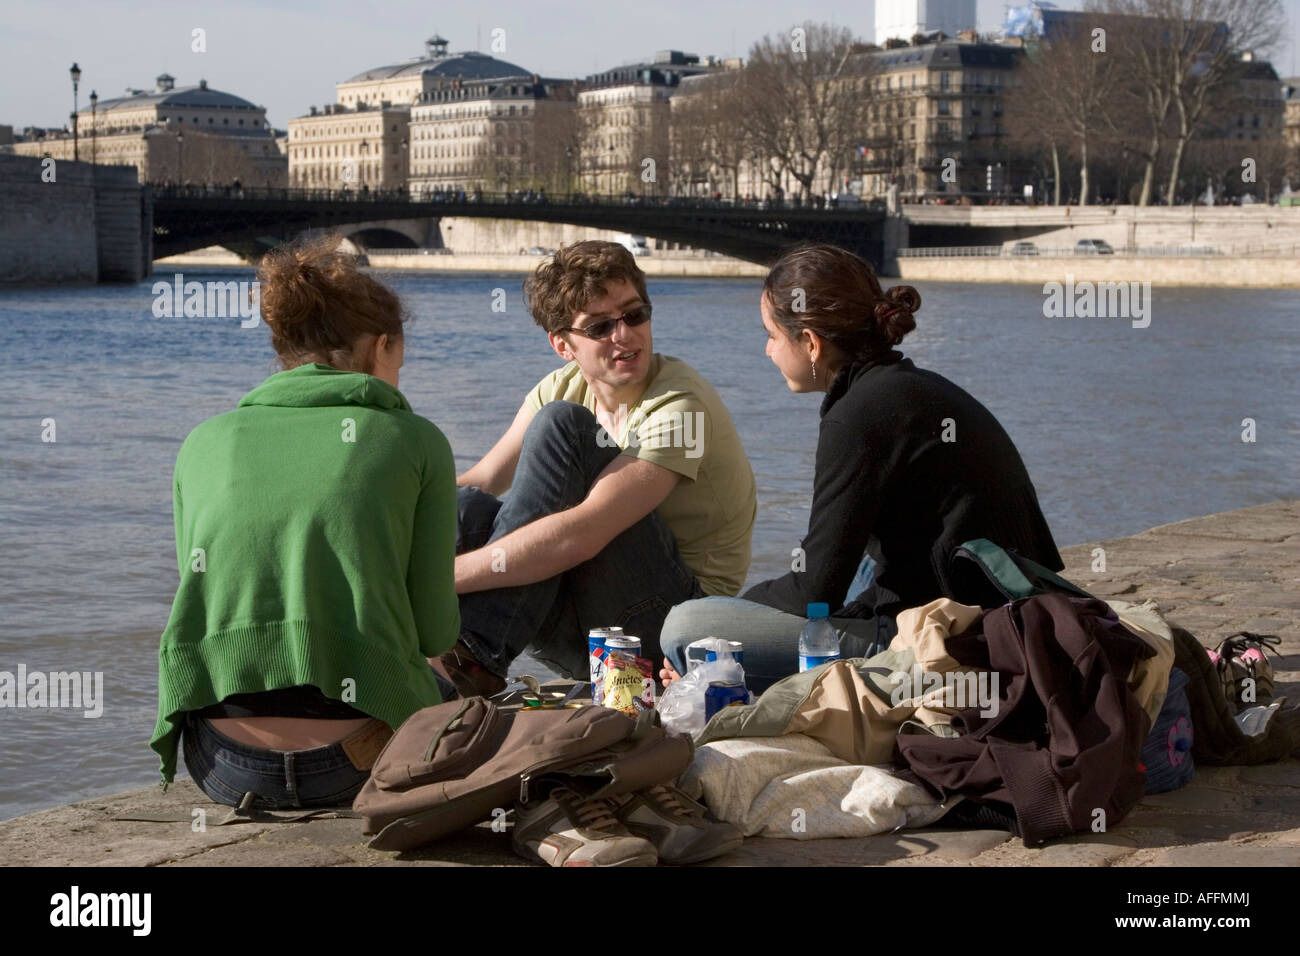 Group of three young Parisians having a picnic by the River Seine in Paris France Stock Photo